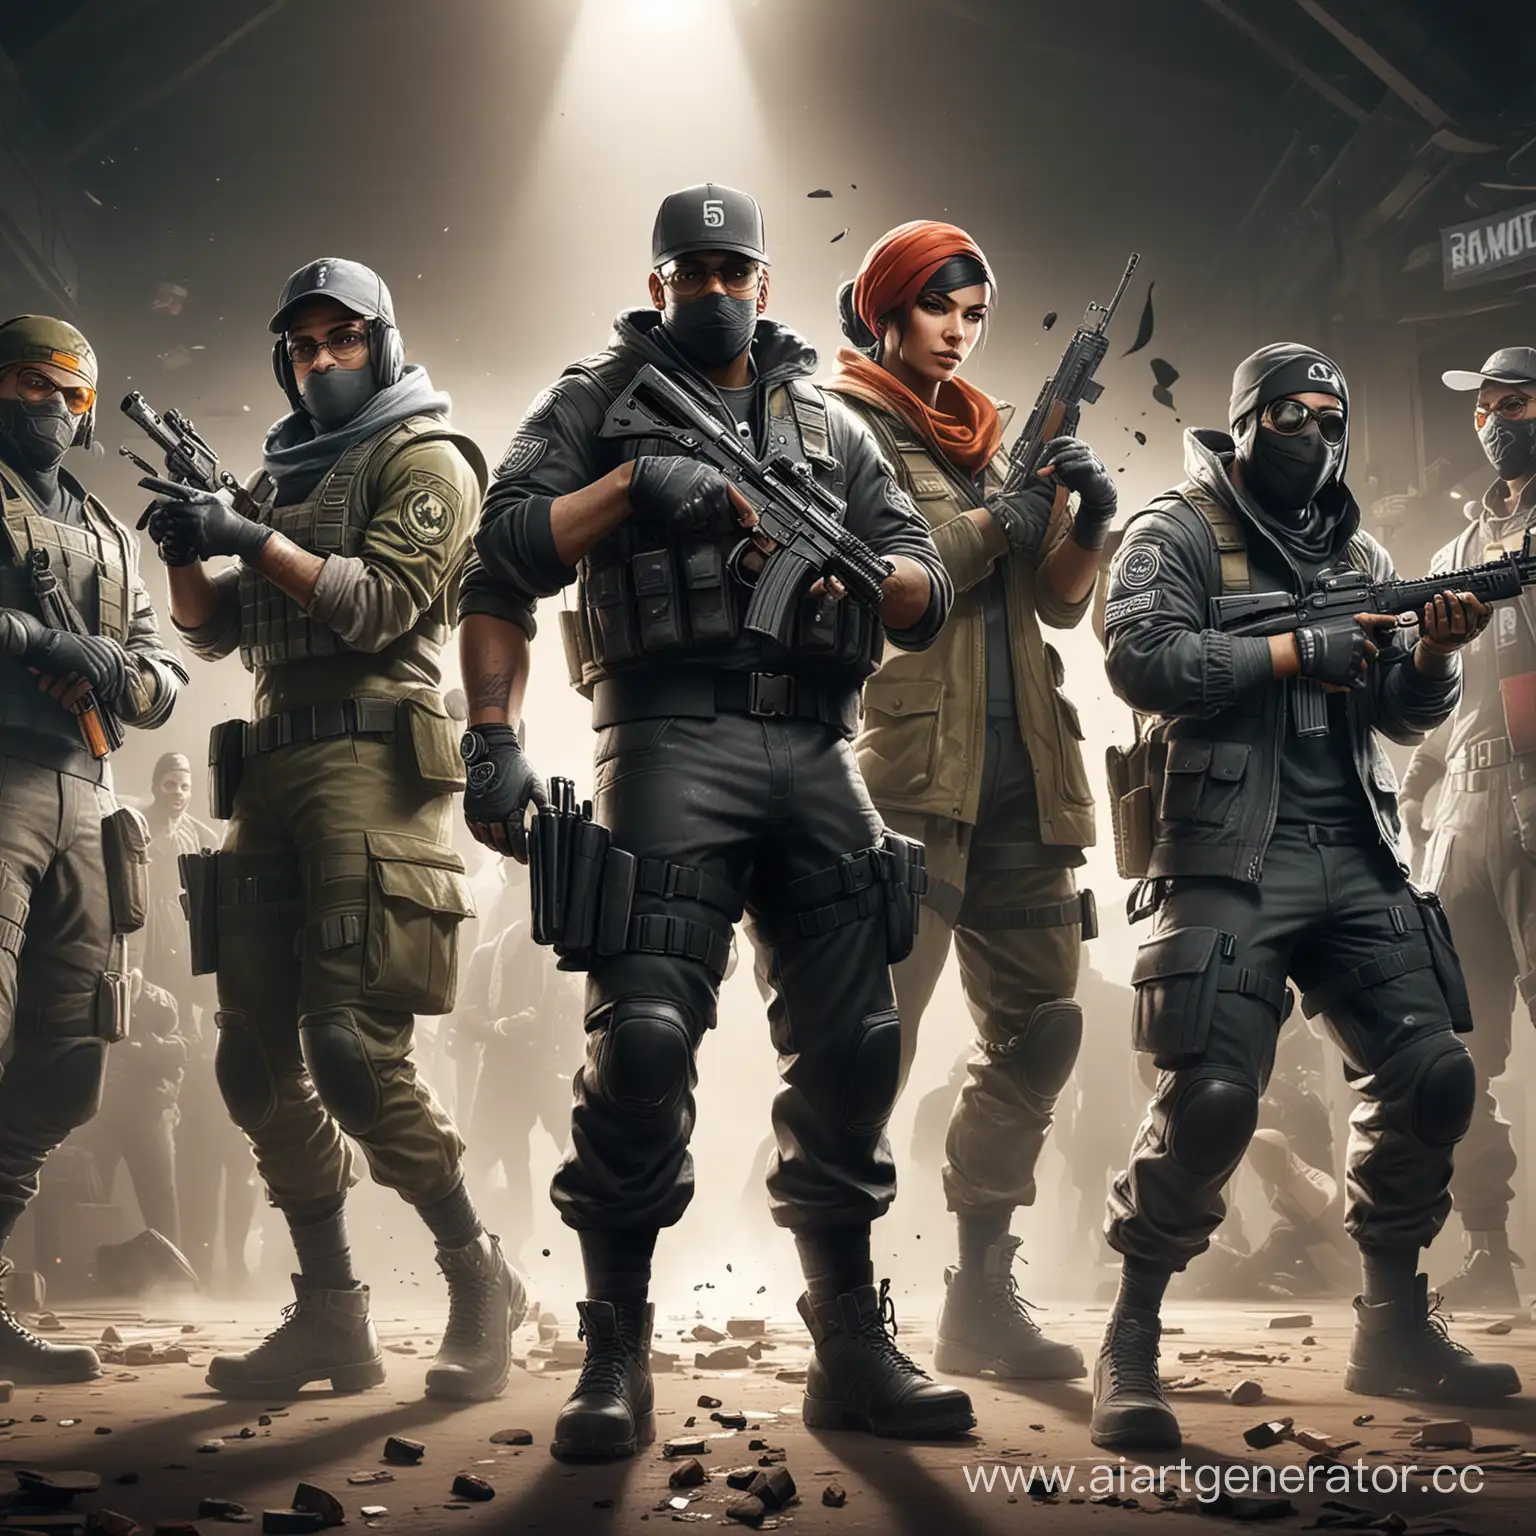 Stylish-Rappers-Amid-Rainbow-Six-Siege-Operatives-in-Intense-Action-Scene